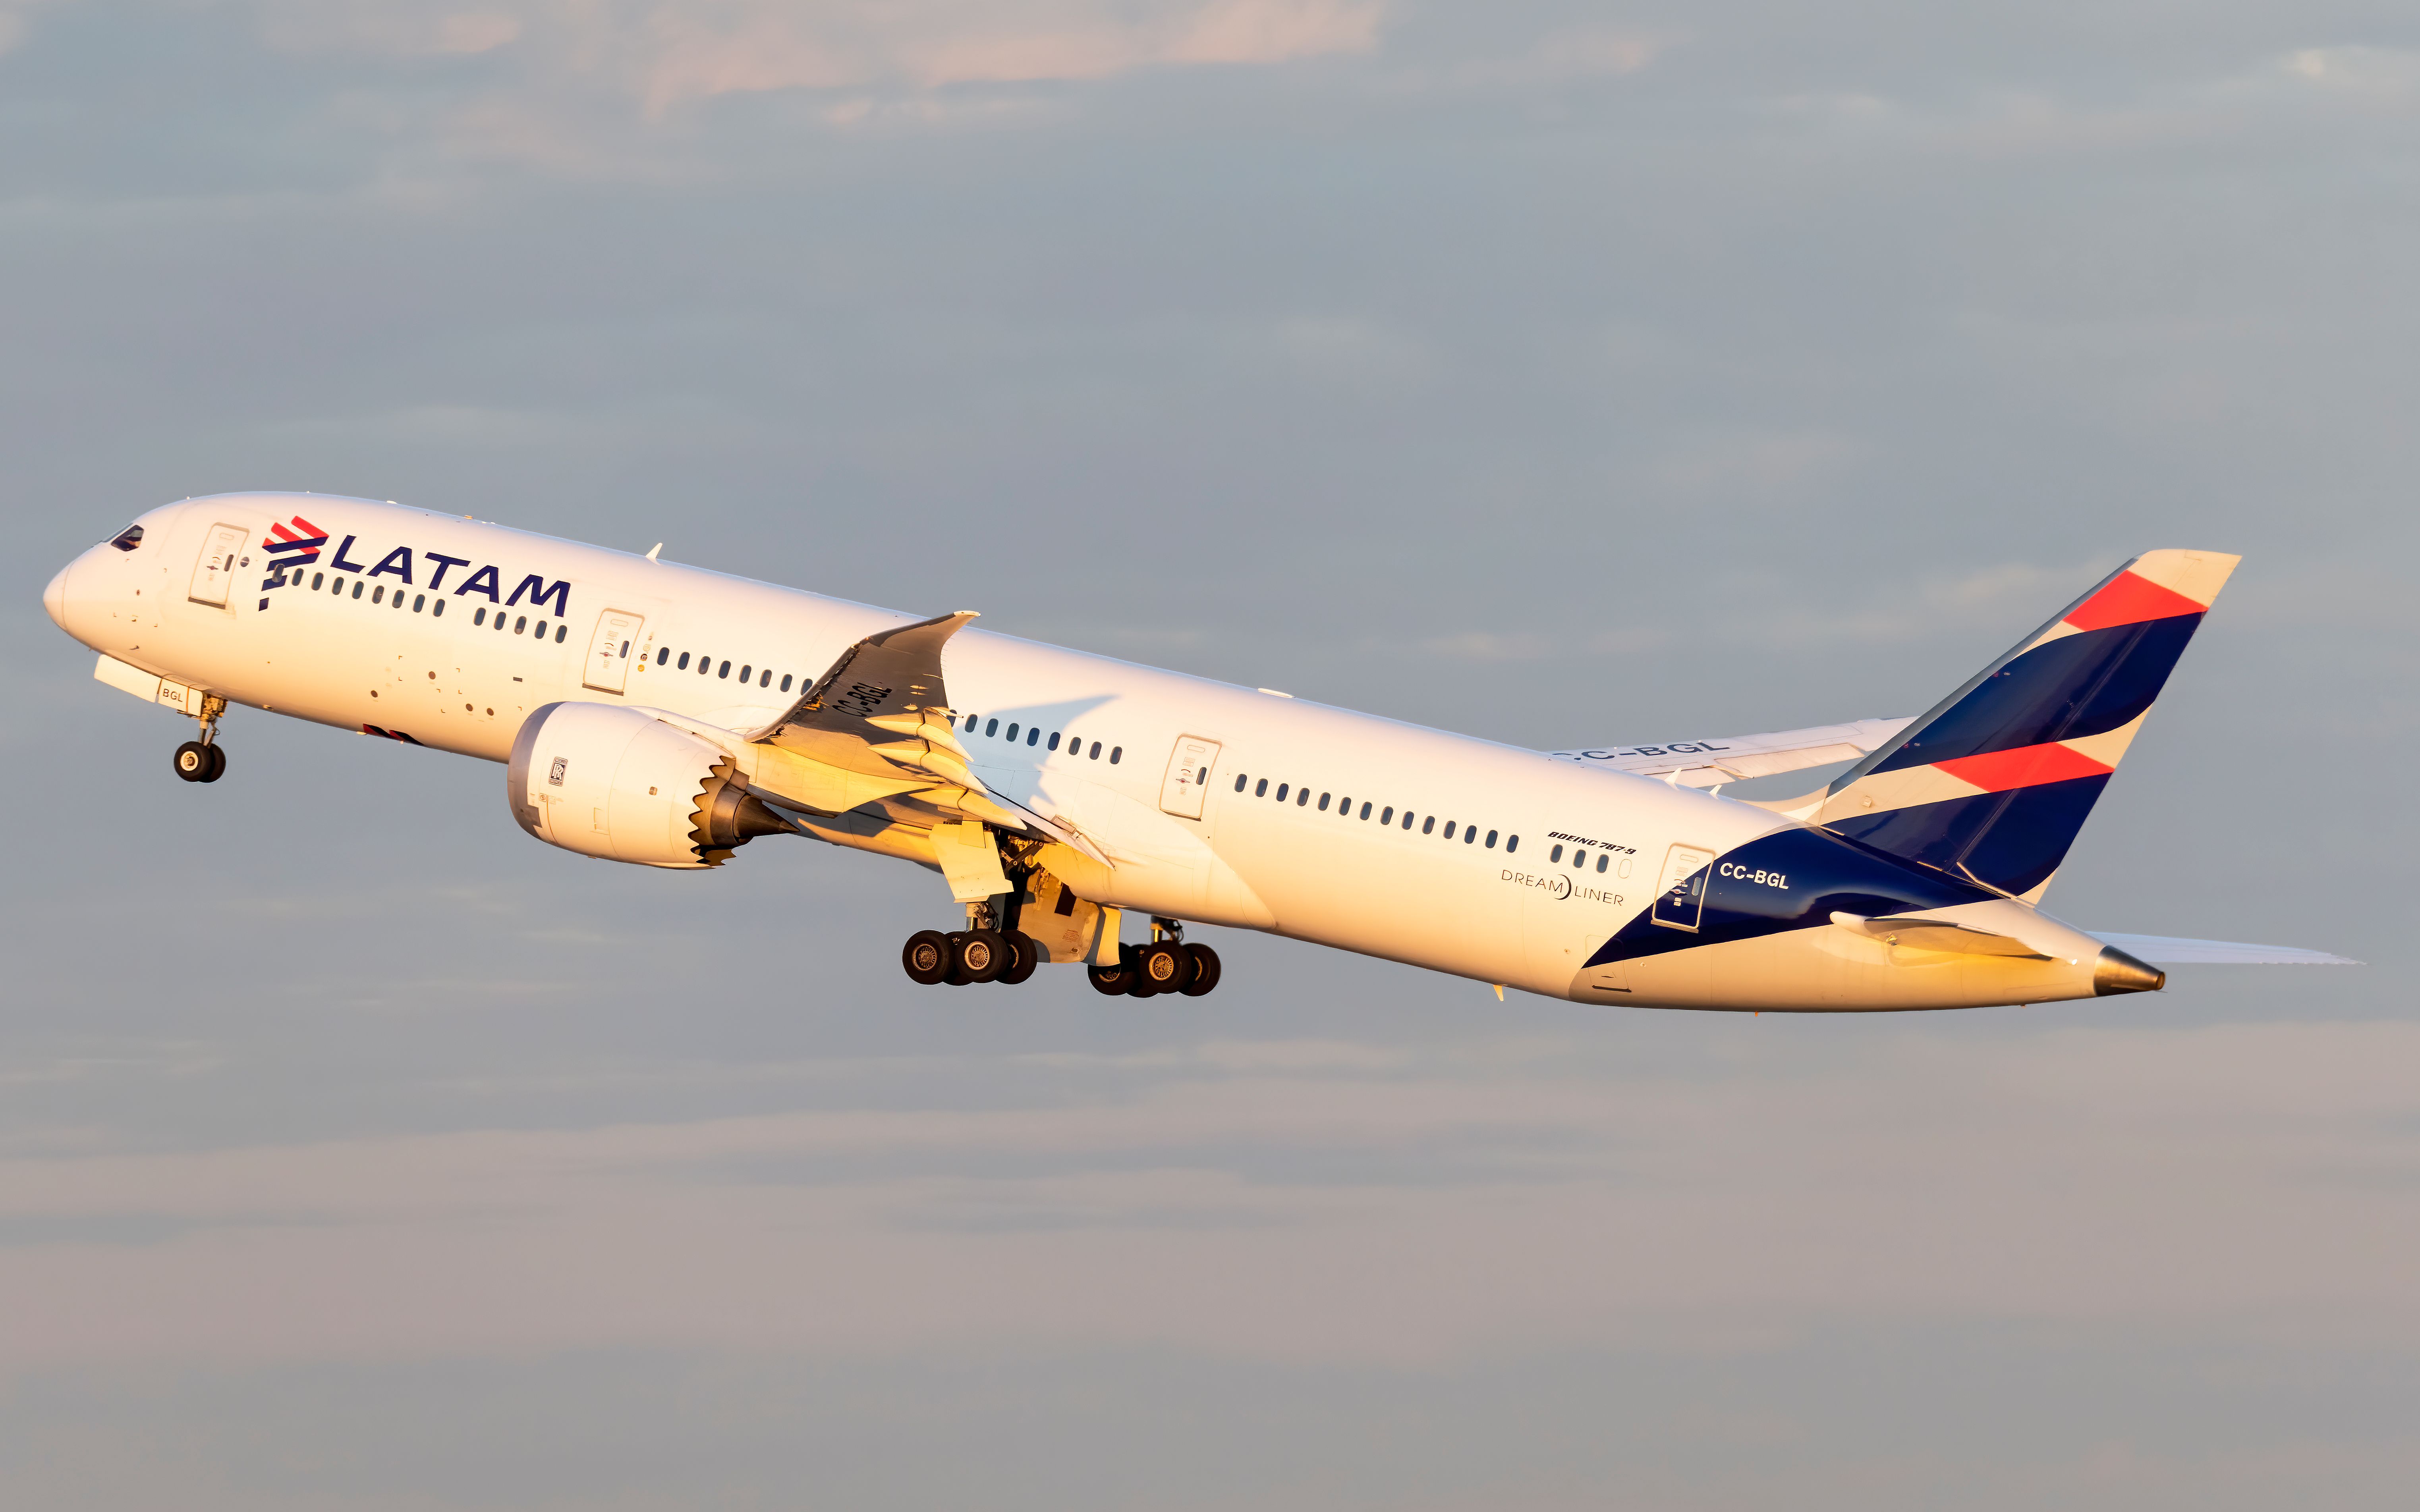 A LATAM Airlines Boeing 787-9 Dreamliner flying in the sky.